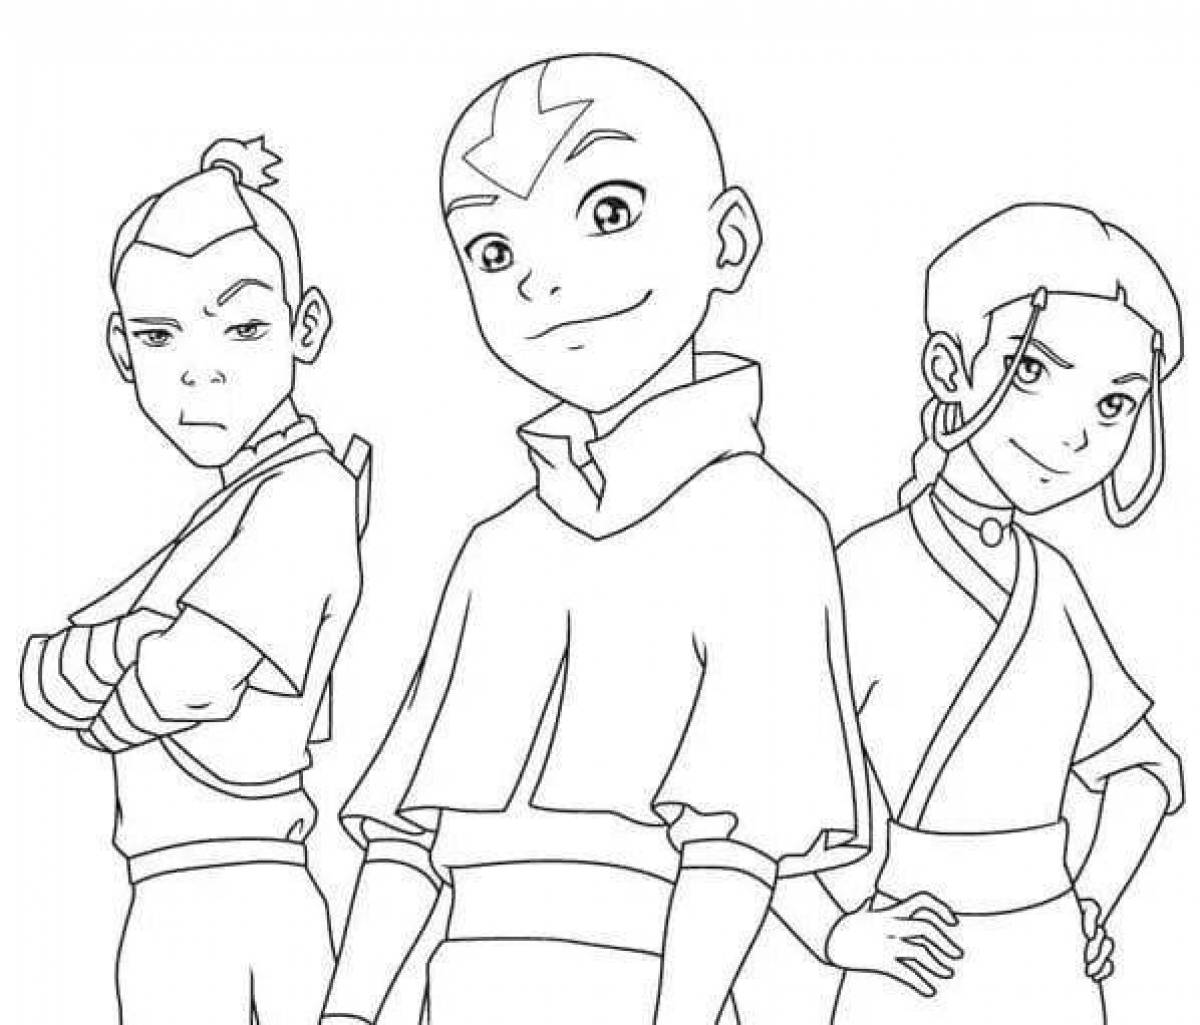 Aang's deceptive avatar coloring page